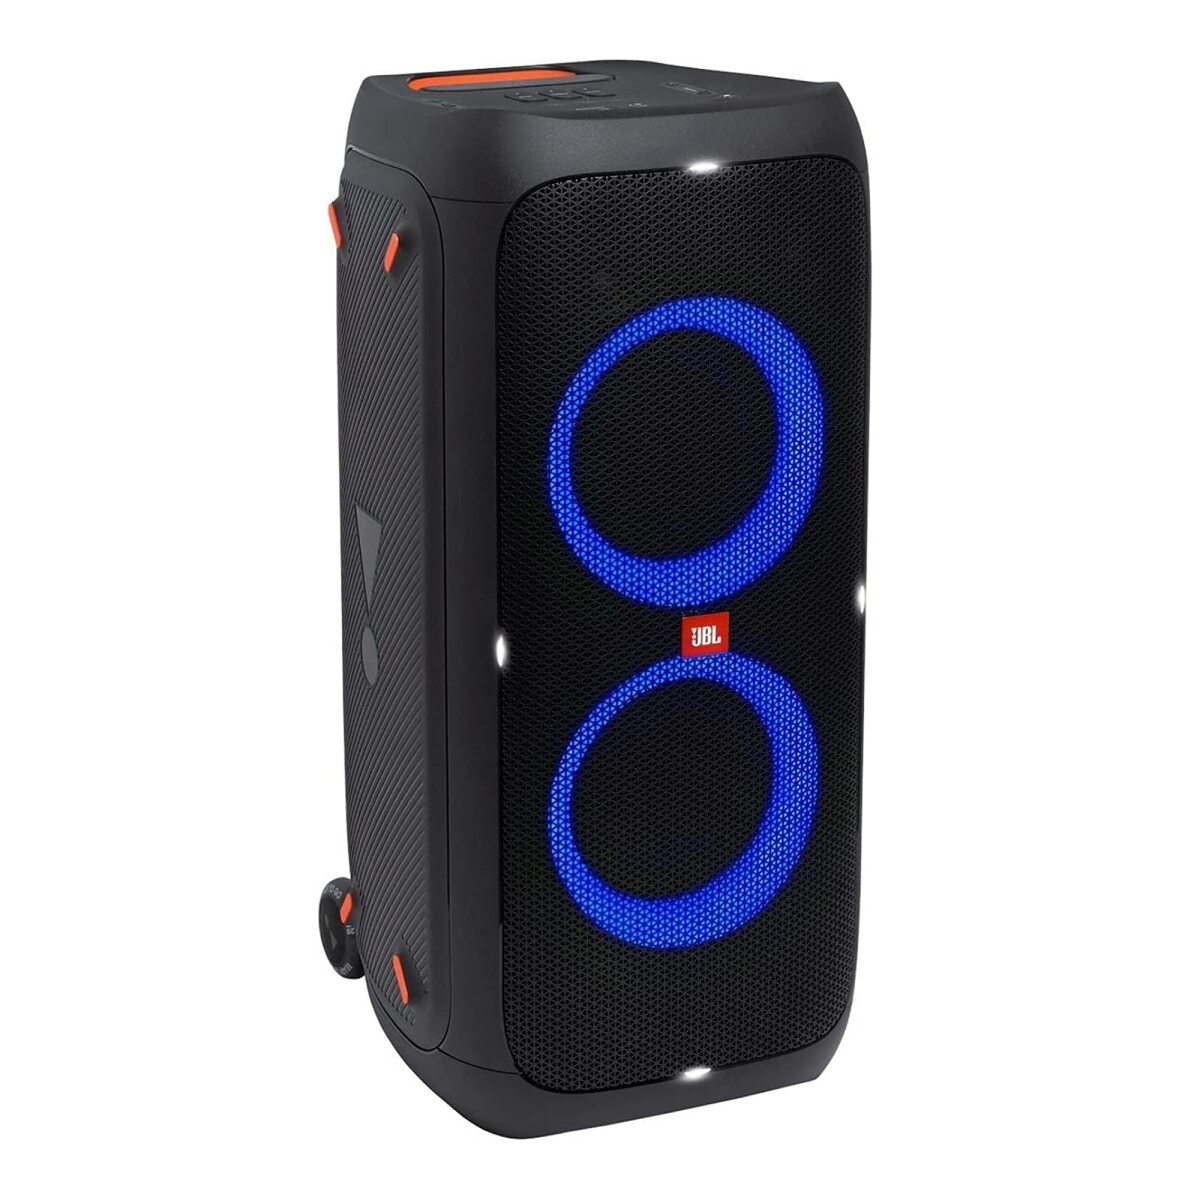 Parlante Inalámbrico Jbl Partybox 310 Bluetooth 240W Rms - 001 